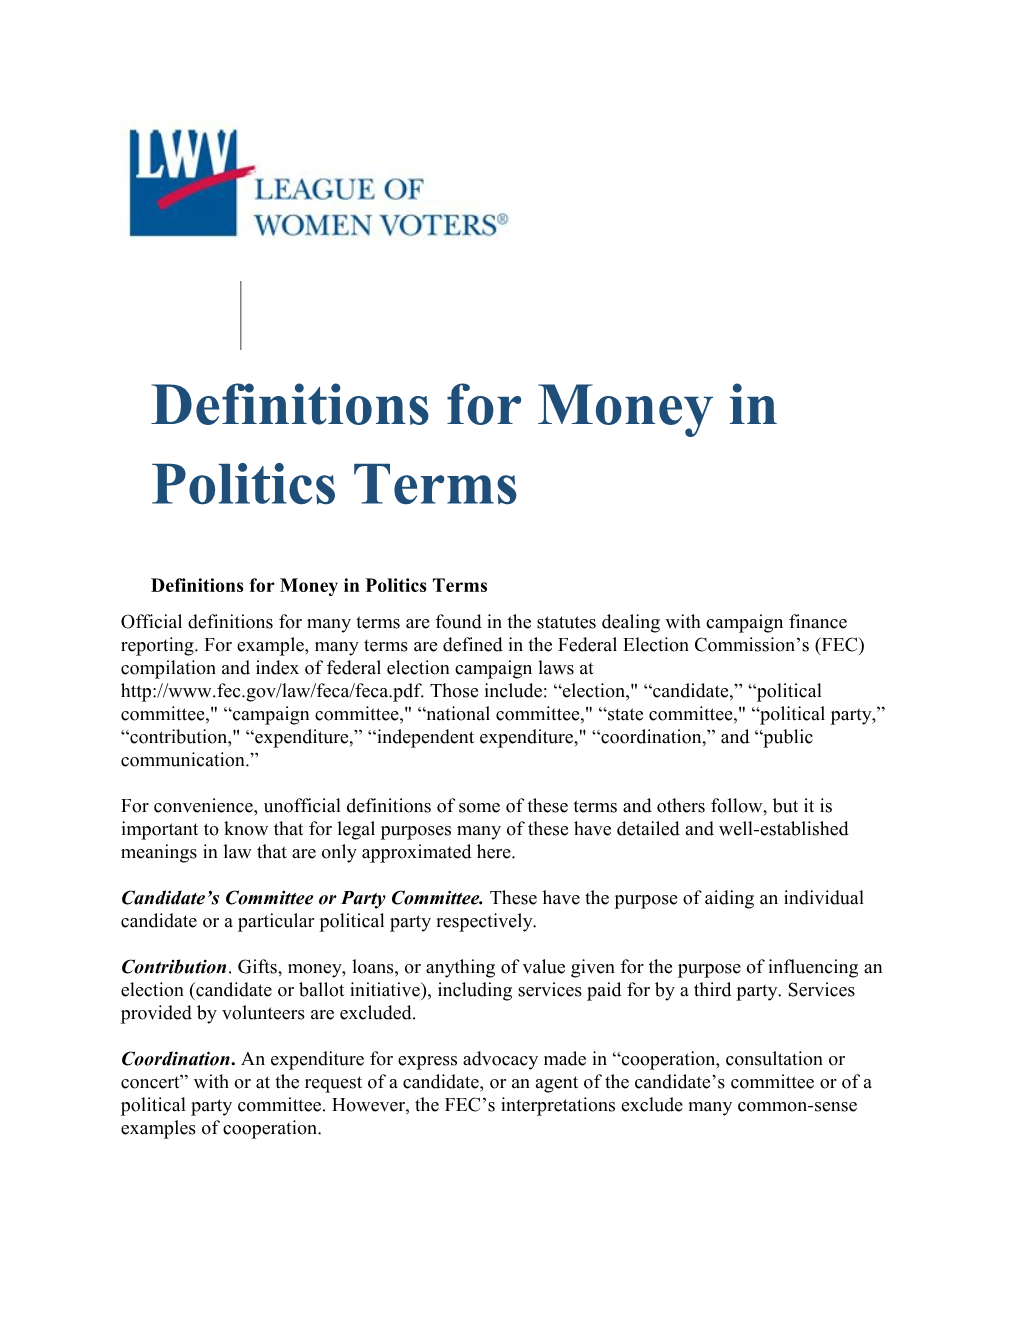 Definitions for Money in Politics Terms